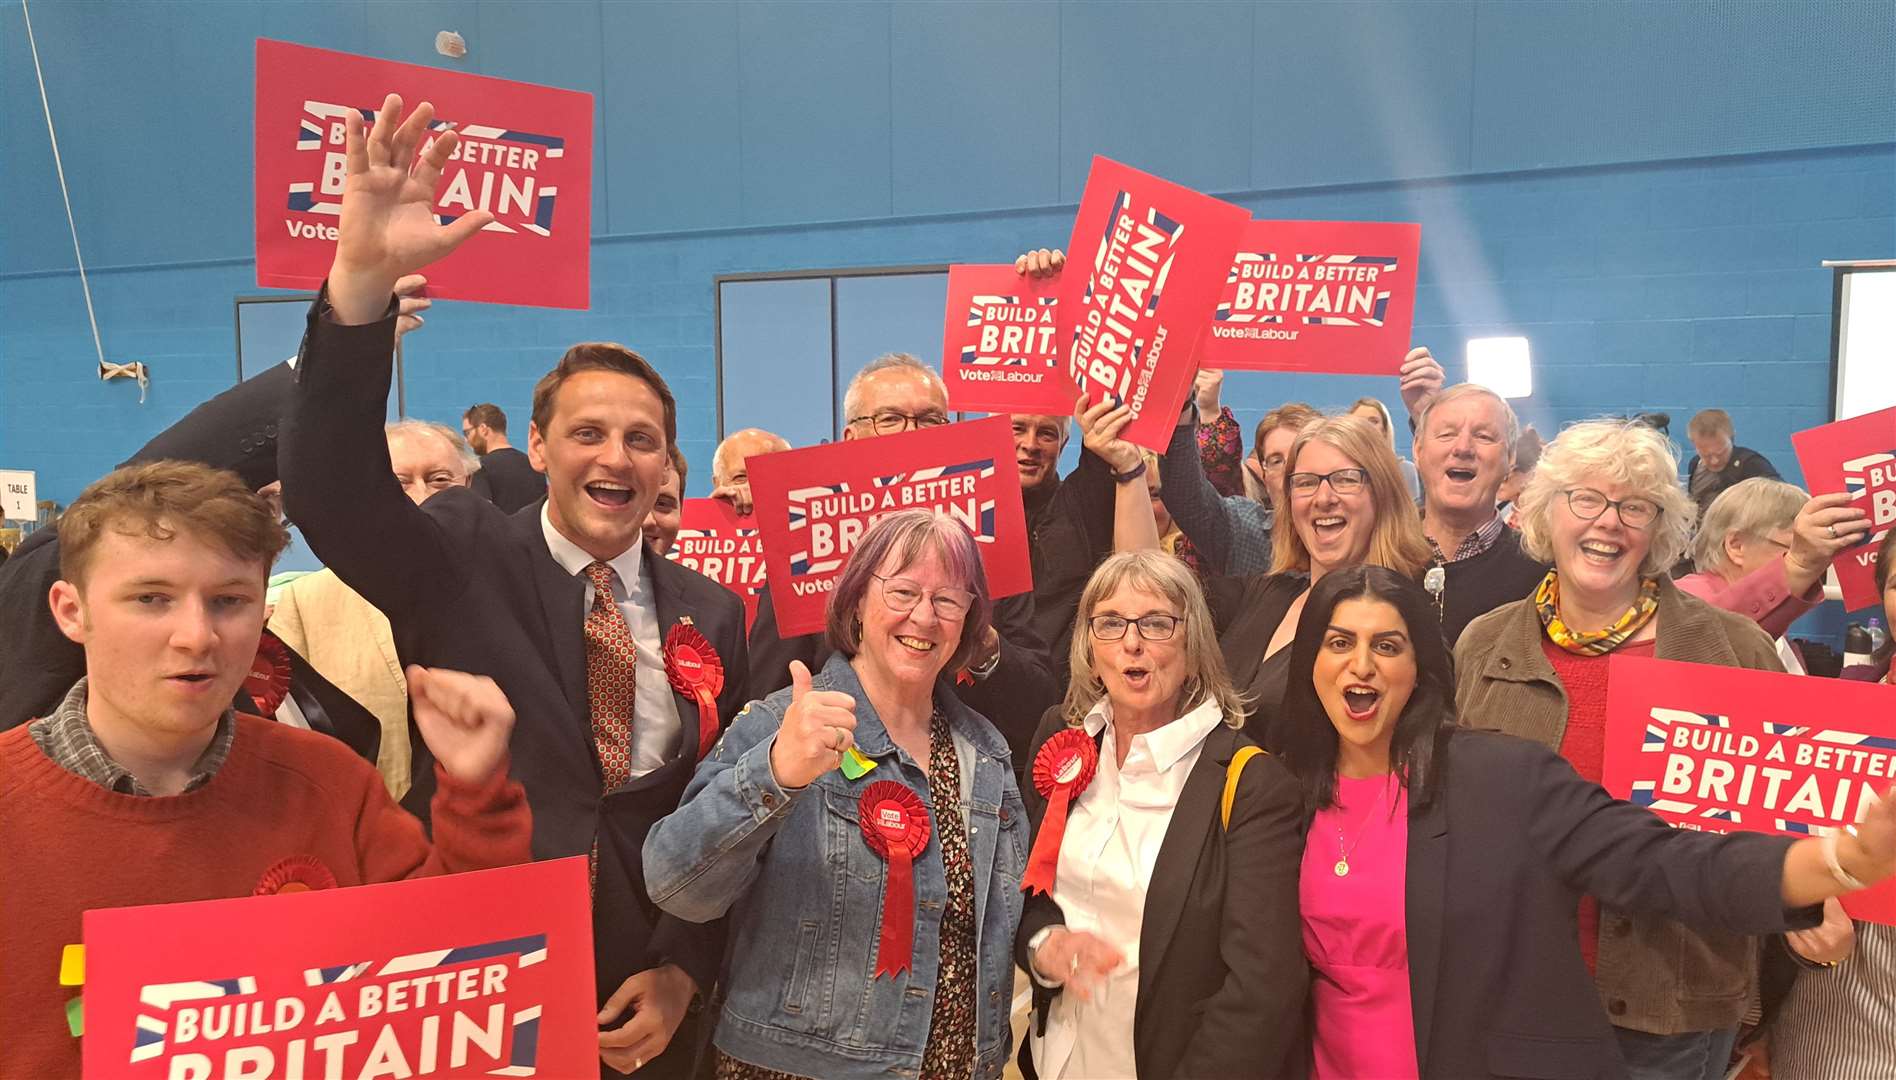 Triumph for Labour in the election